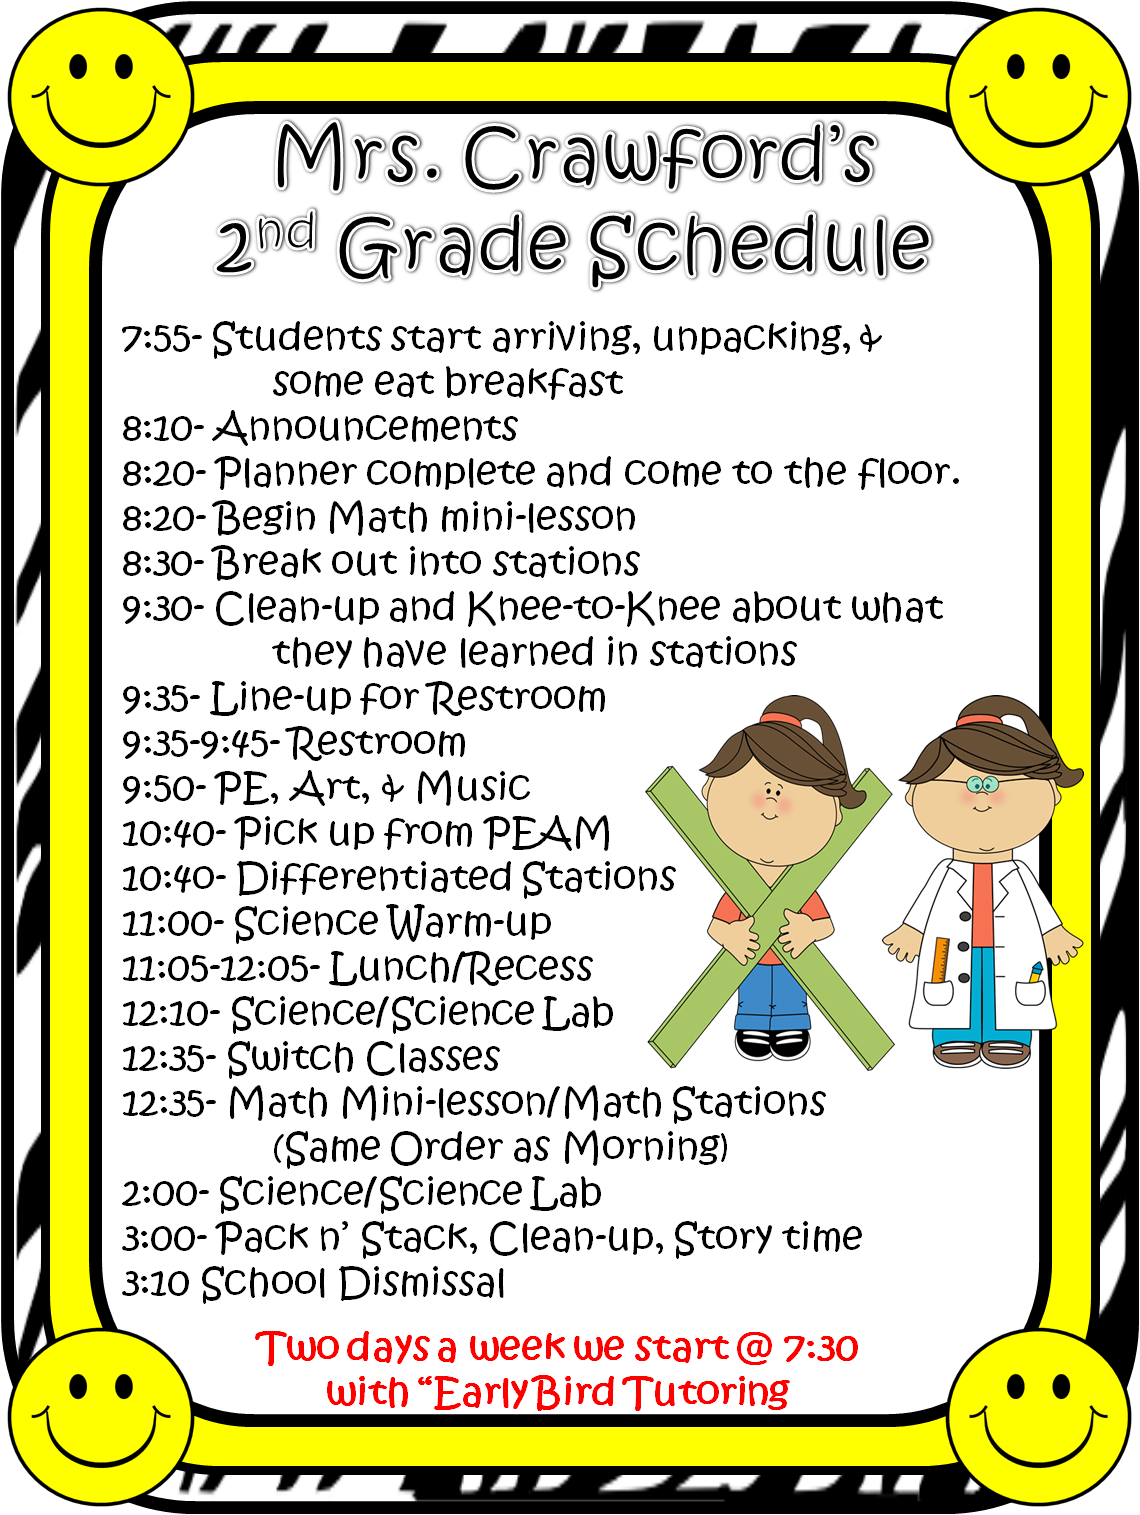 My Schedule for Second Grade